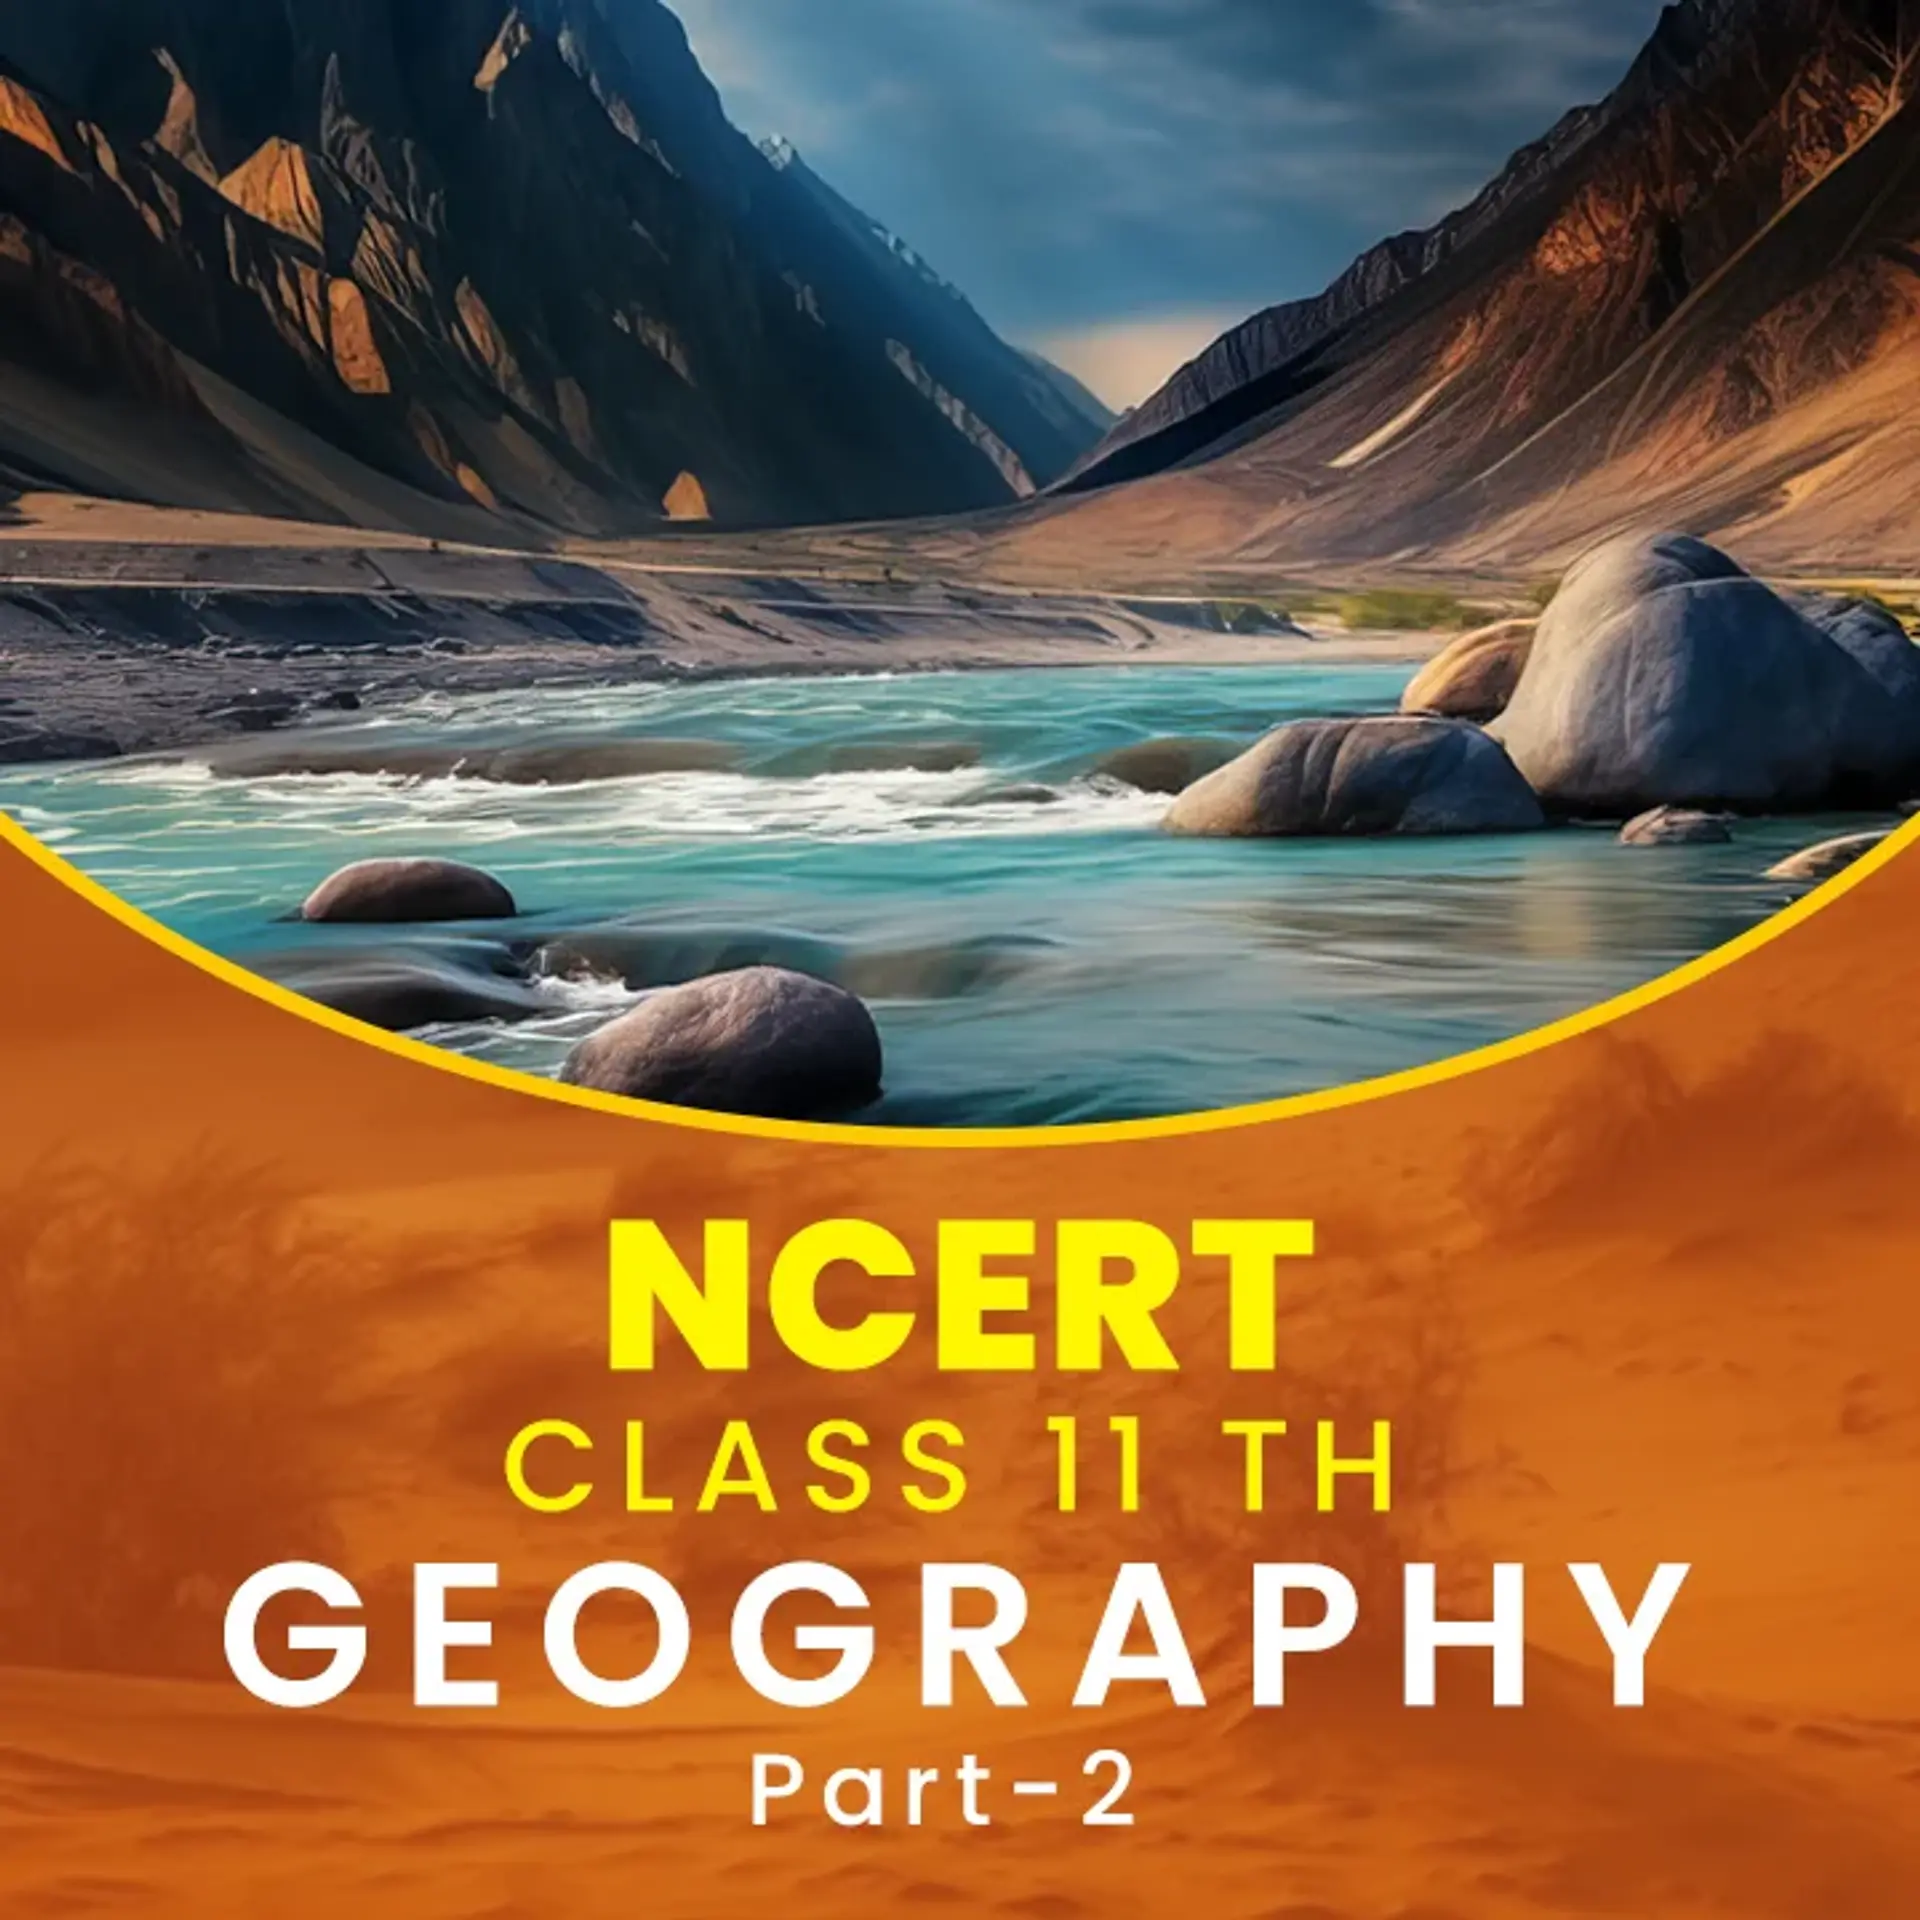 NCERT Class 11th Geography Part 2  | 